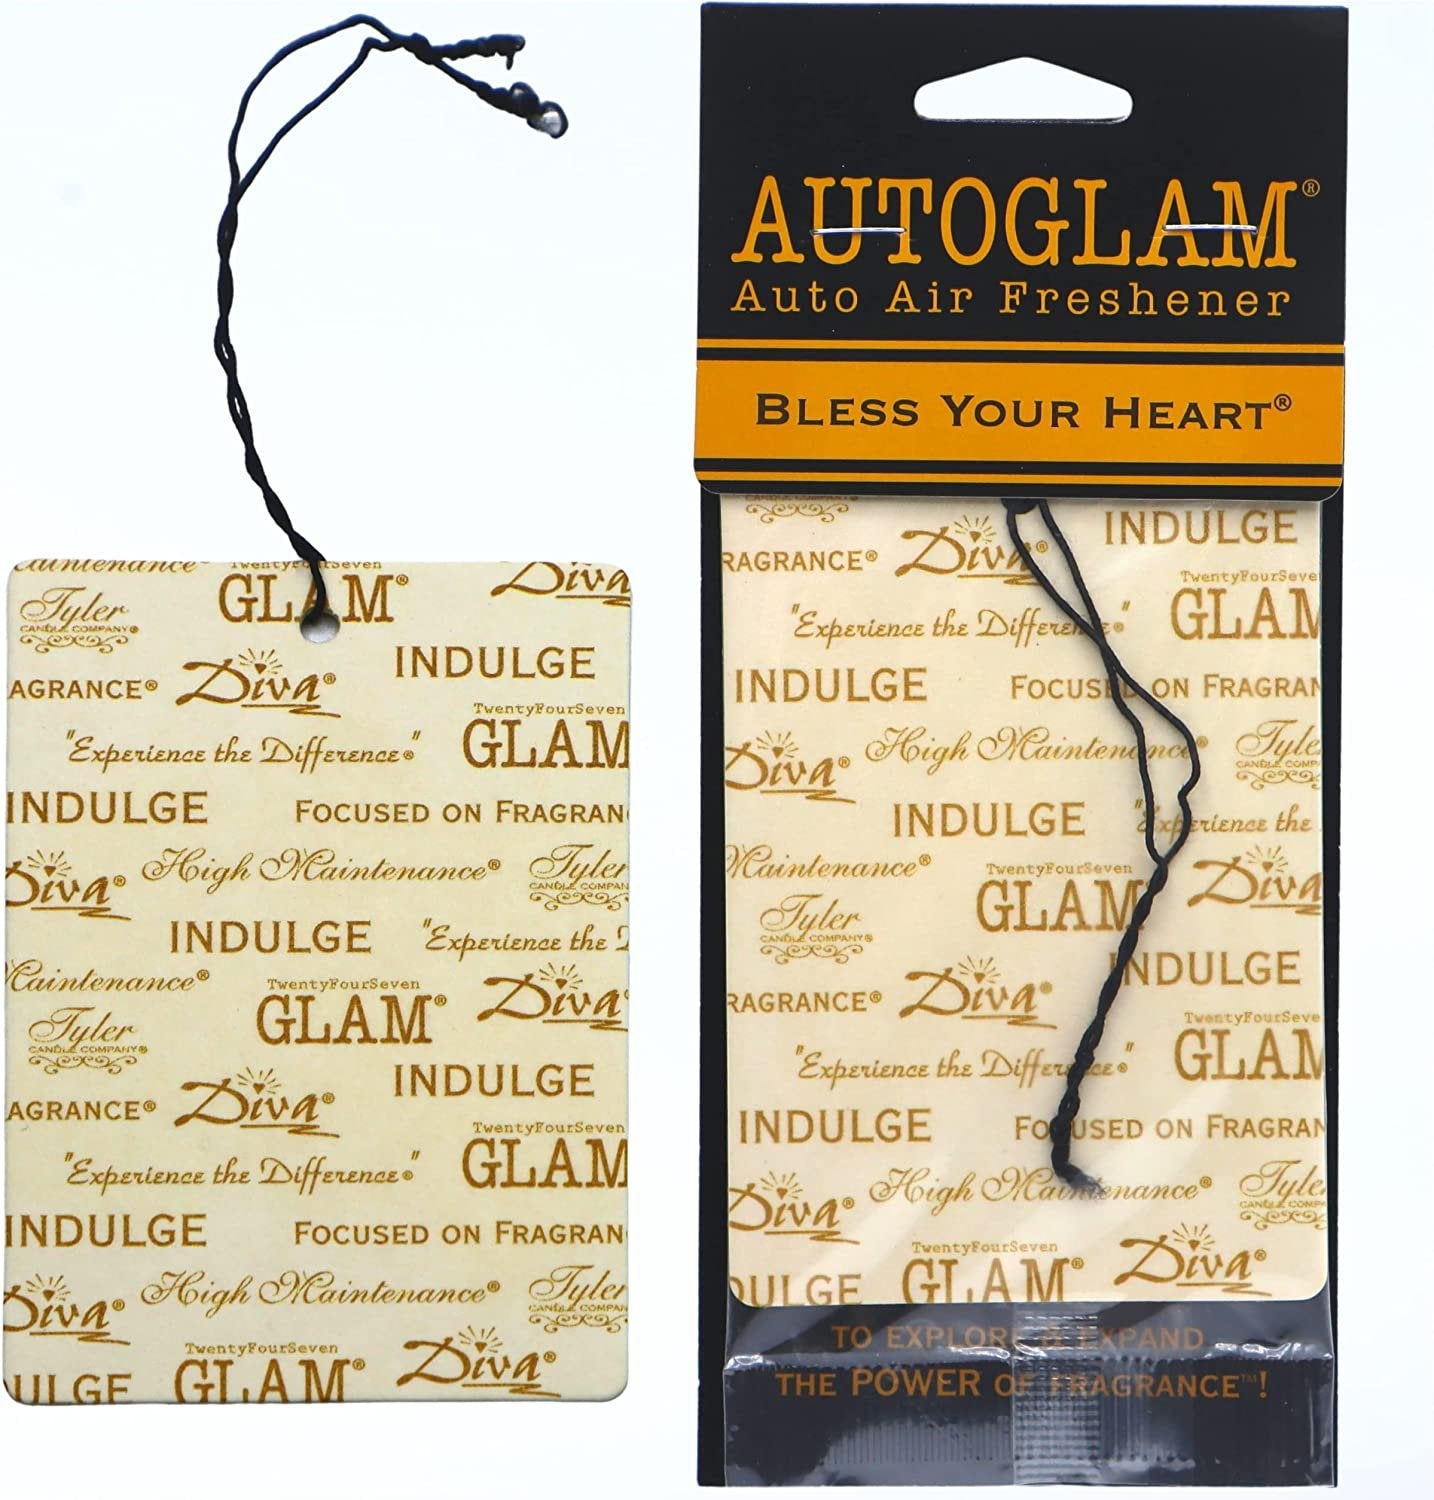 Tyler Candle Company AutoGlam Car Air Fresheners - Bless Your Heart Scent Car  Fresheners Car Odor Eliminator Air Refresher Car Accessories - Pack of 3 w  Worldwide Nutrition Multi Purpose Key Chain 